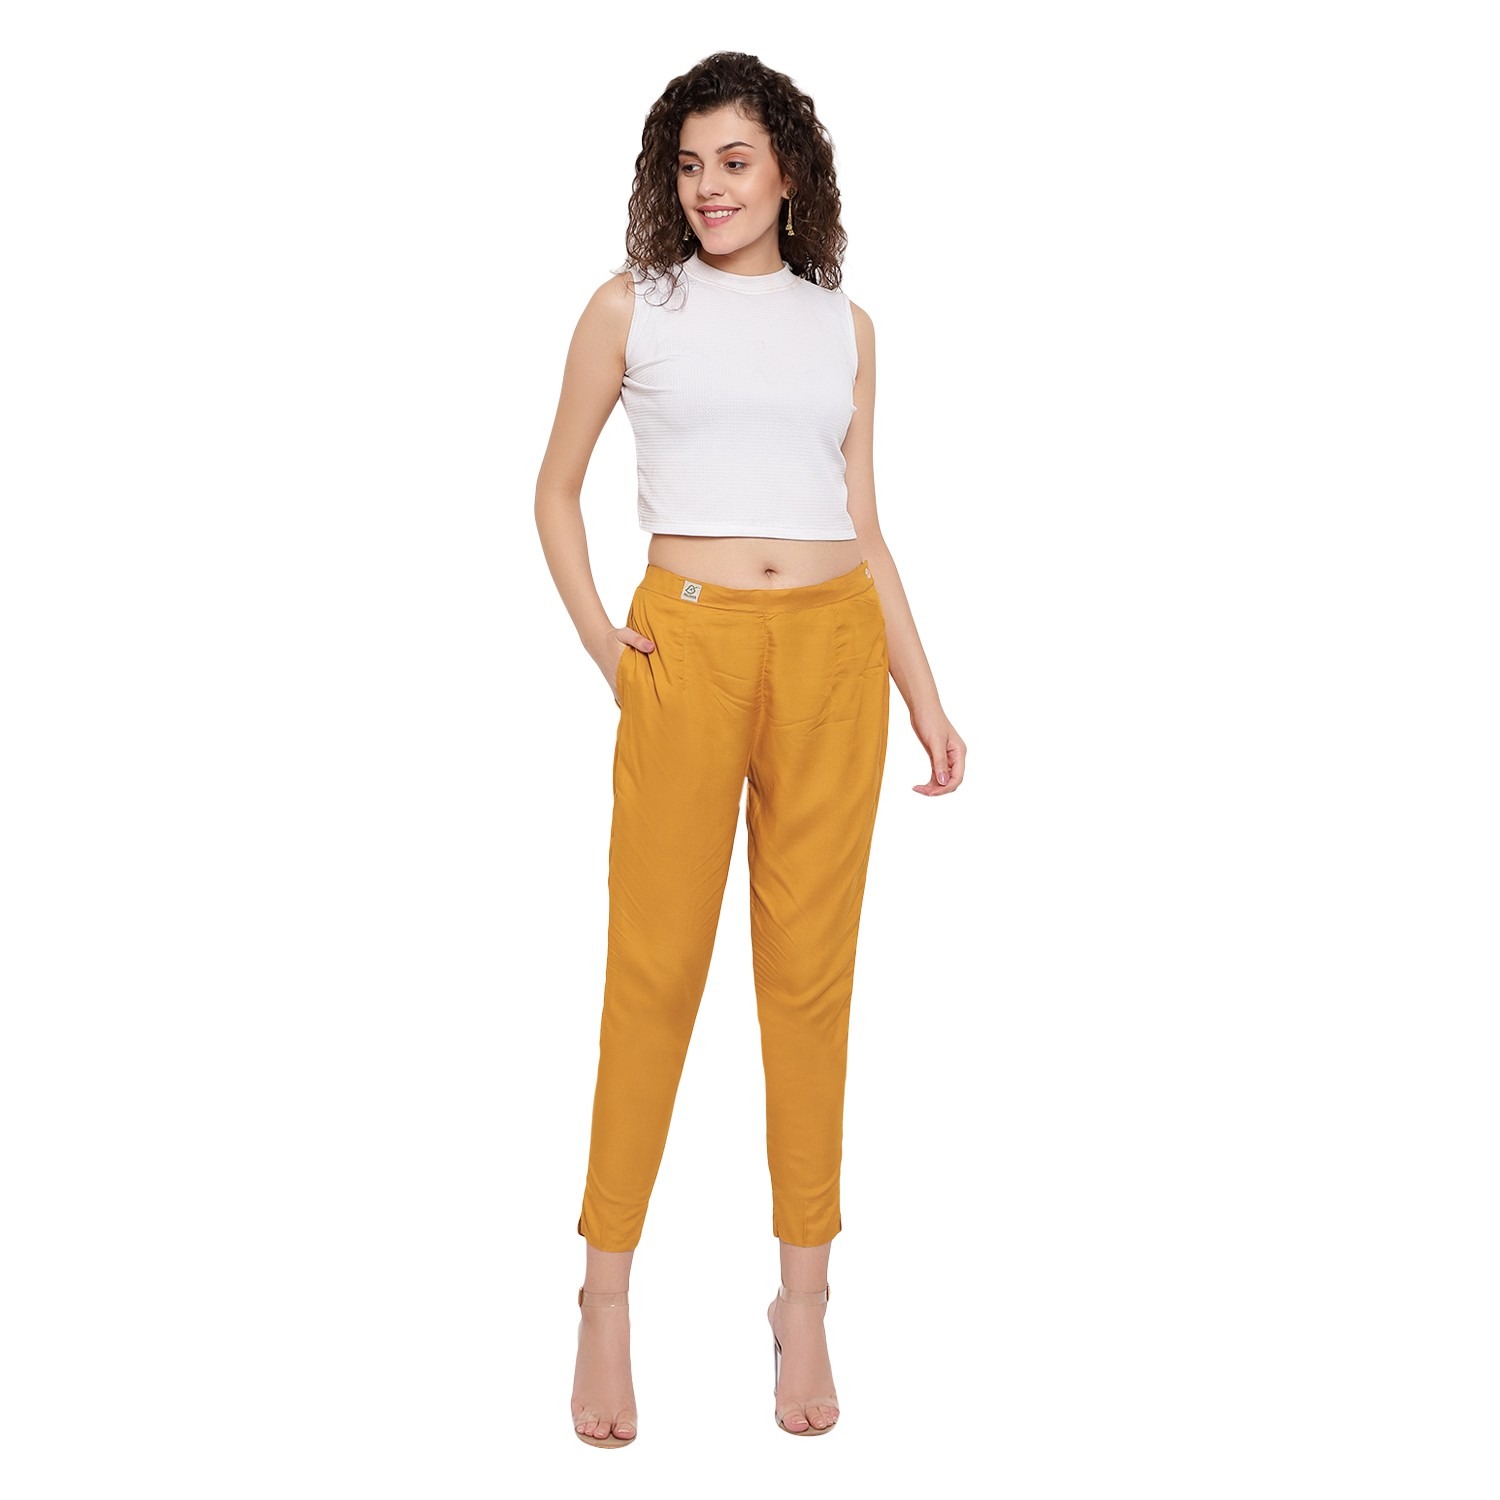 Buy Yellow and Navy Blue Combo of 2 Women Trouser Cotton Flax Pants for  Best Price Reviews Free Shipping